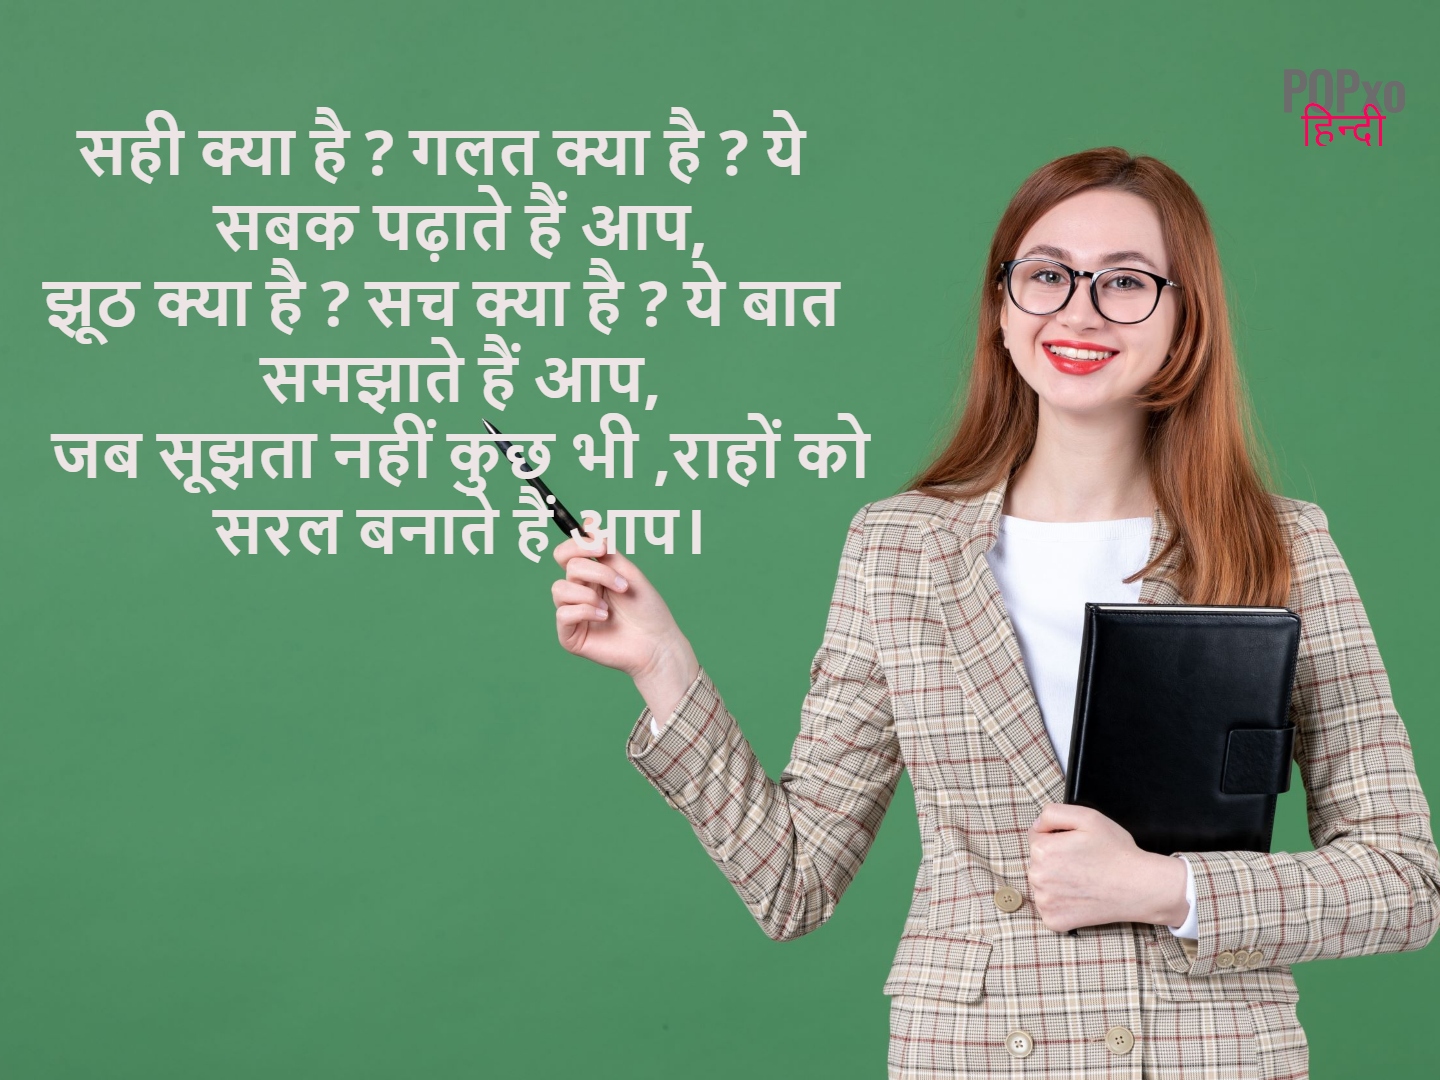 teacher and student relationship essay in hindi